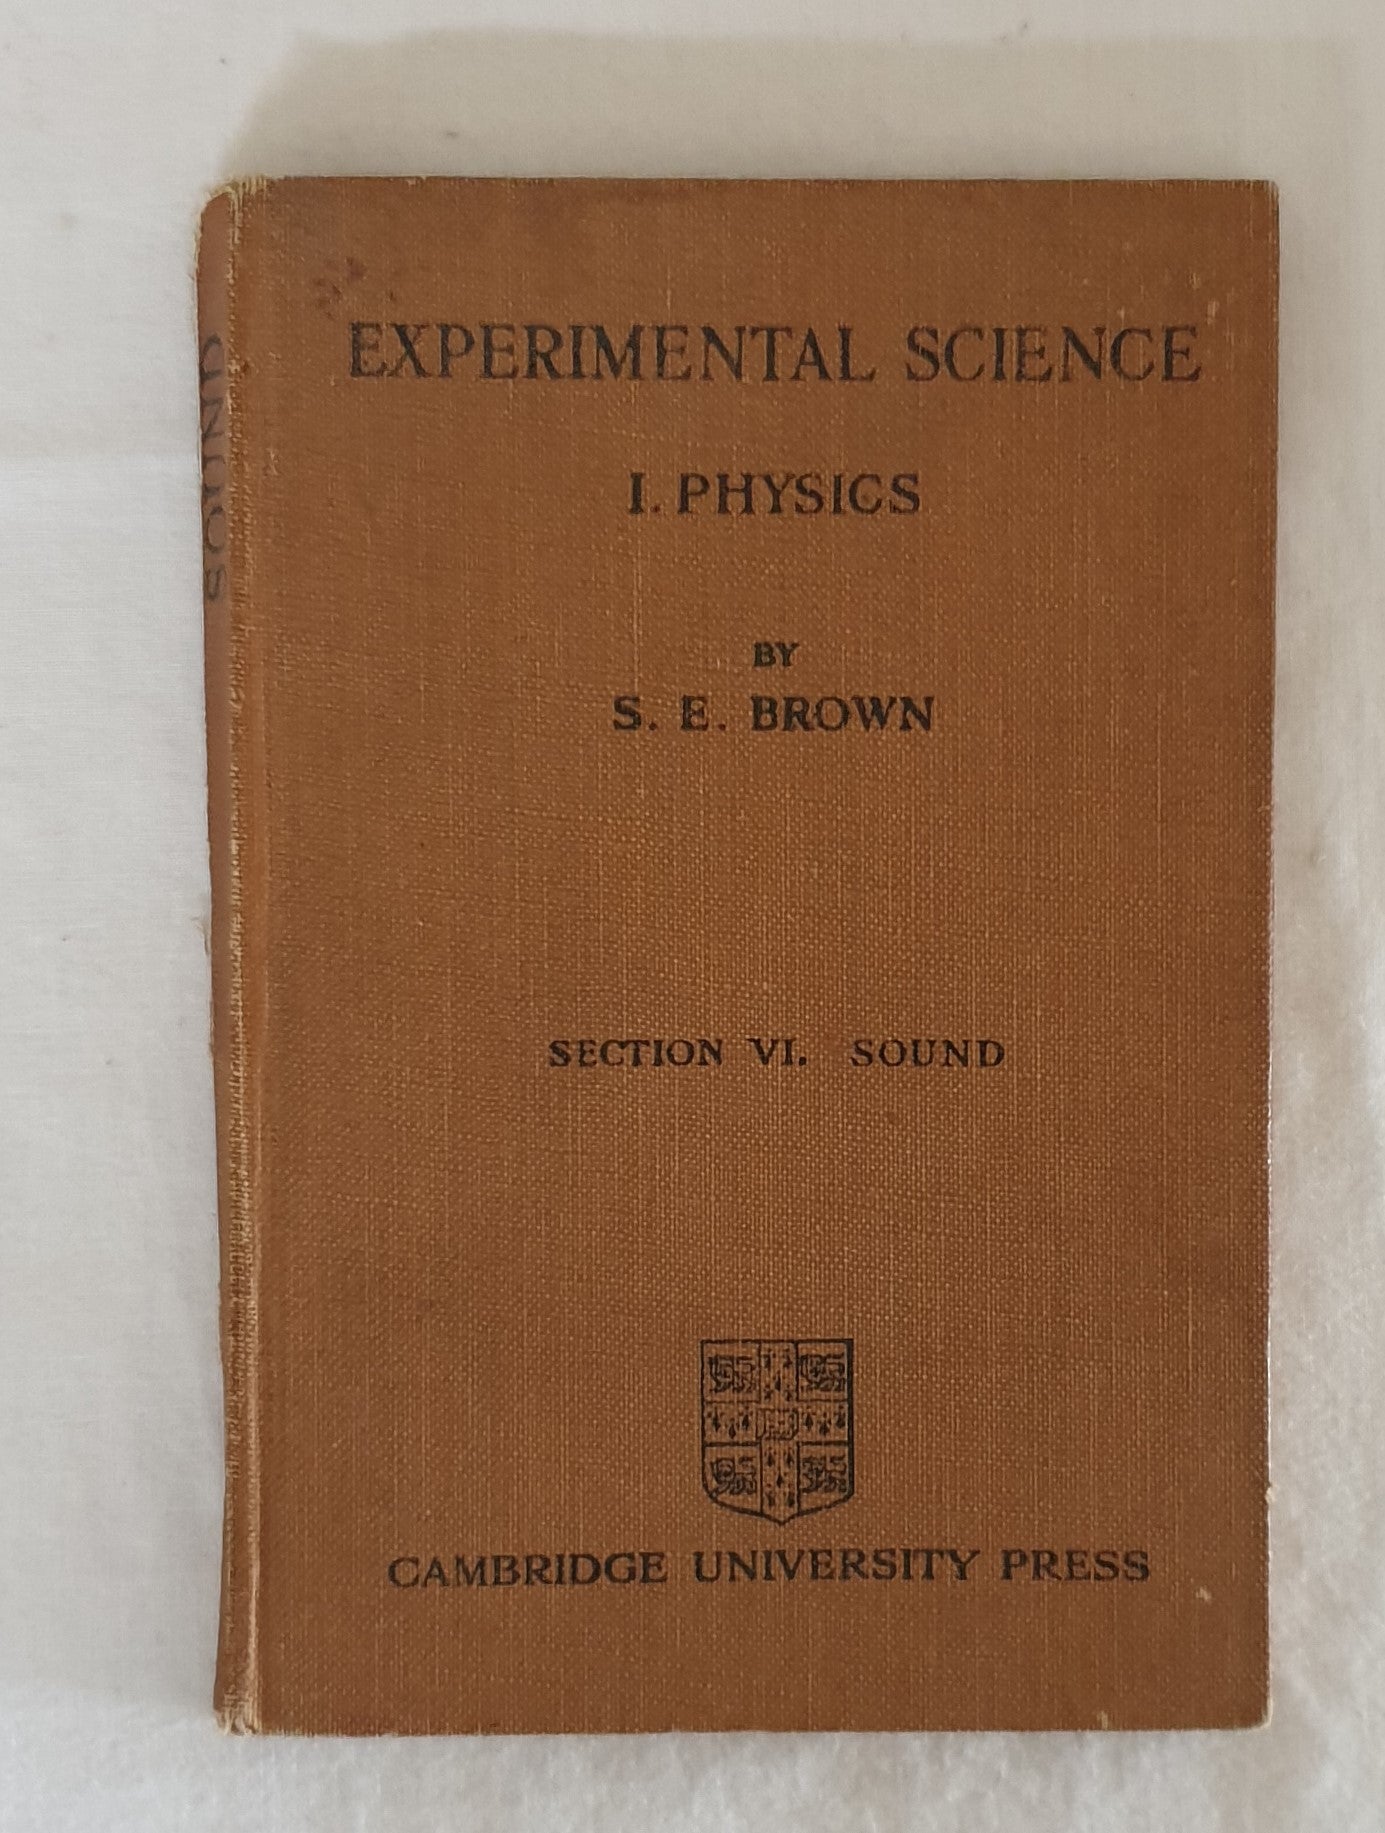 Experimental Science by S. E. Brown